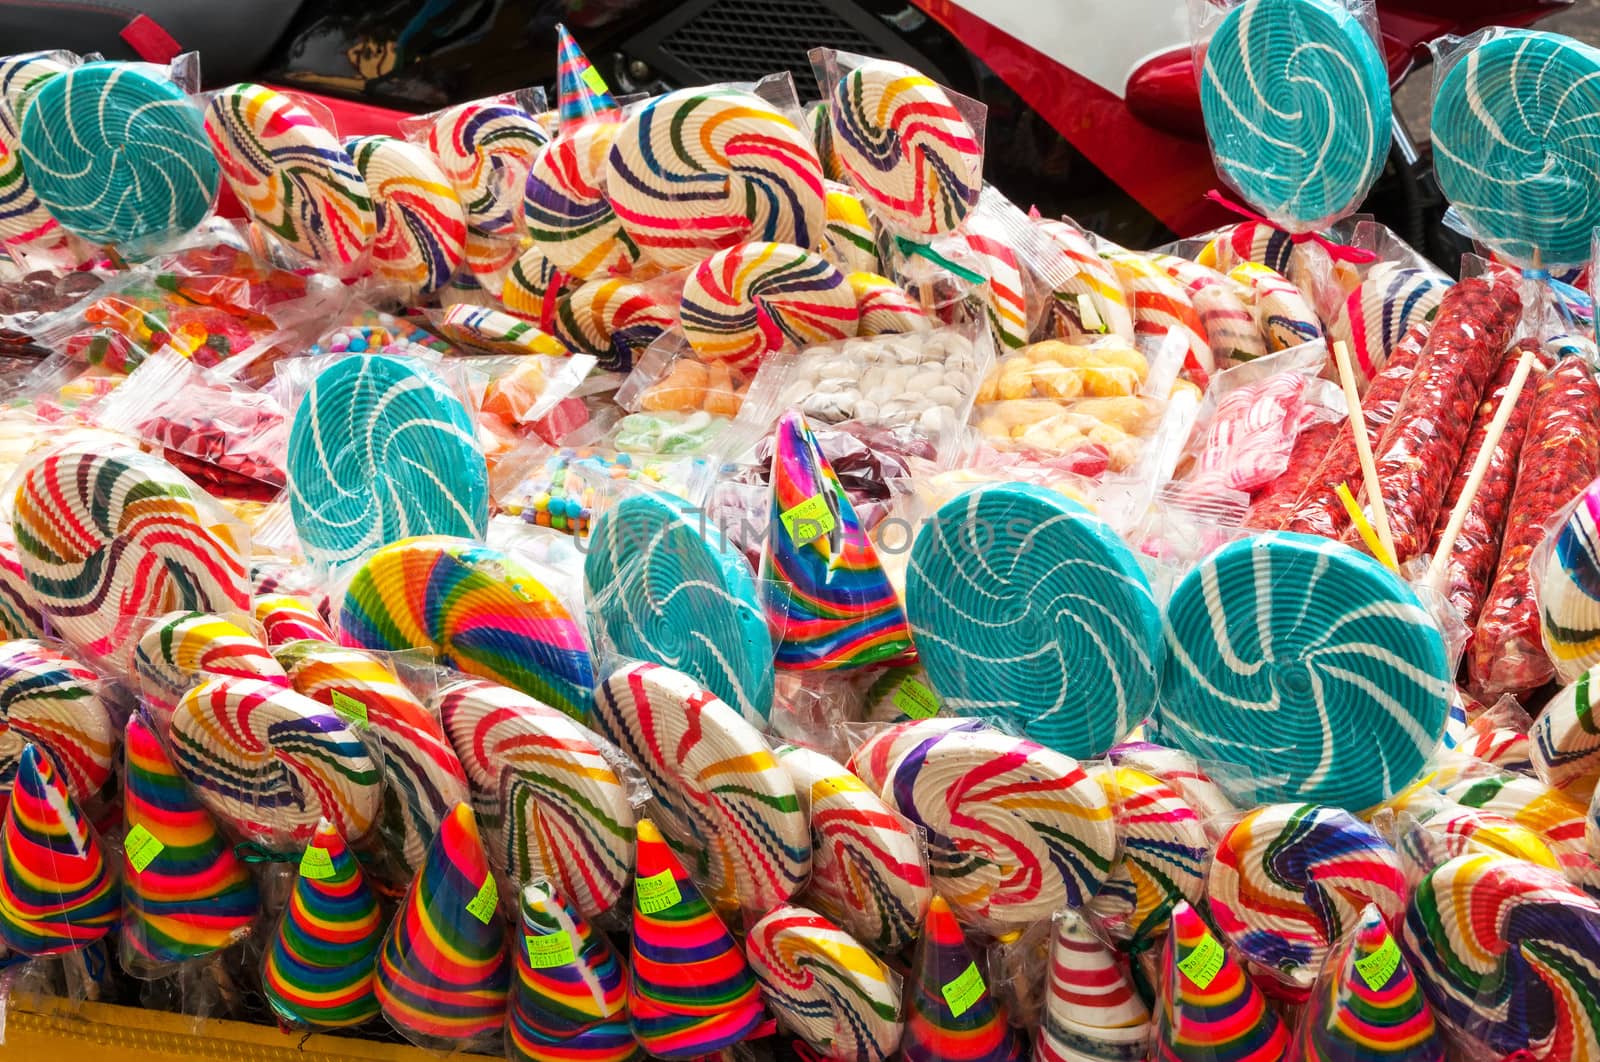 Different kinds of candy for sale in the street in San Cristobal de las Casas, Mexico